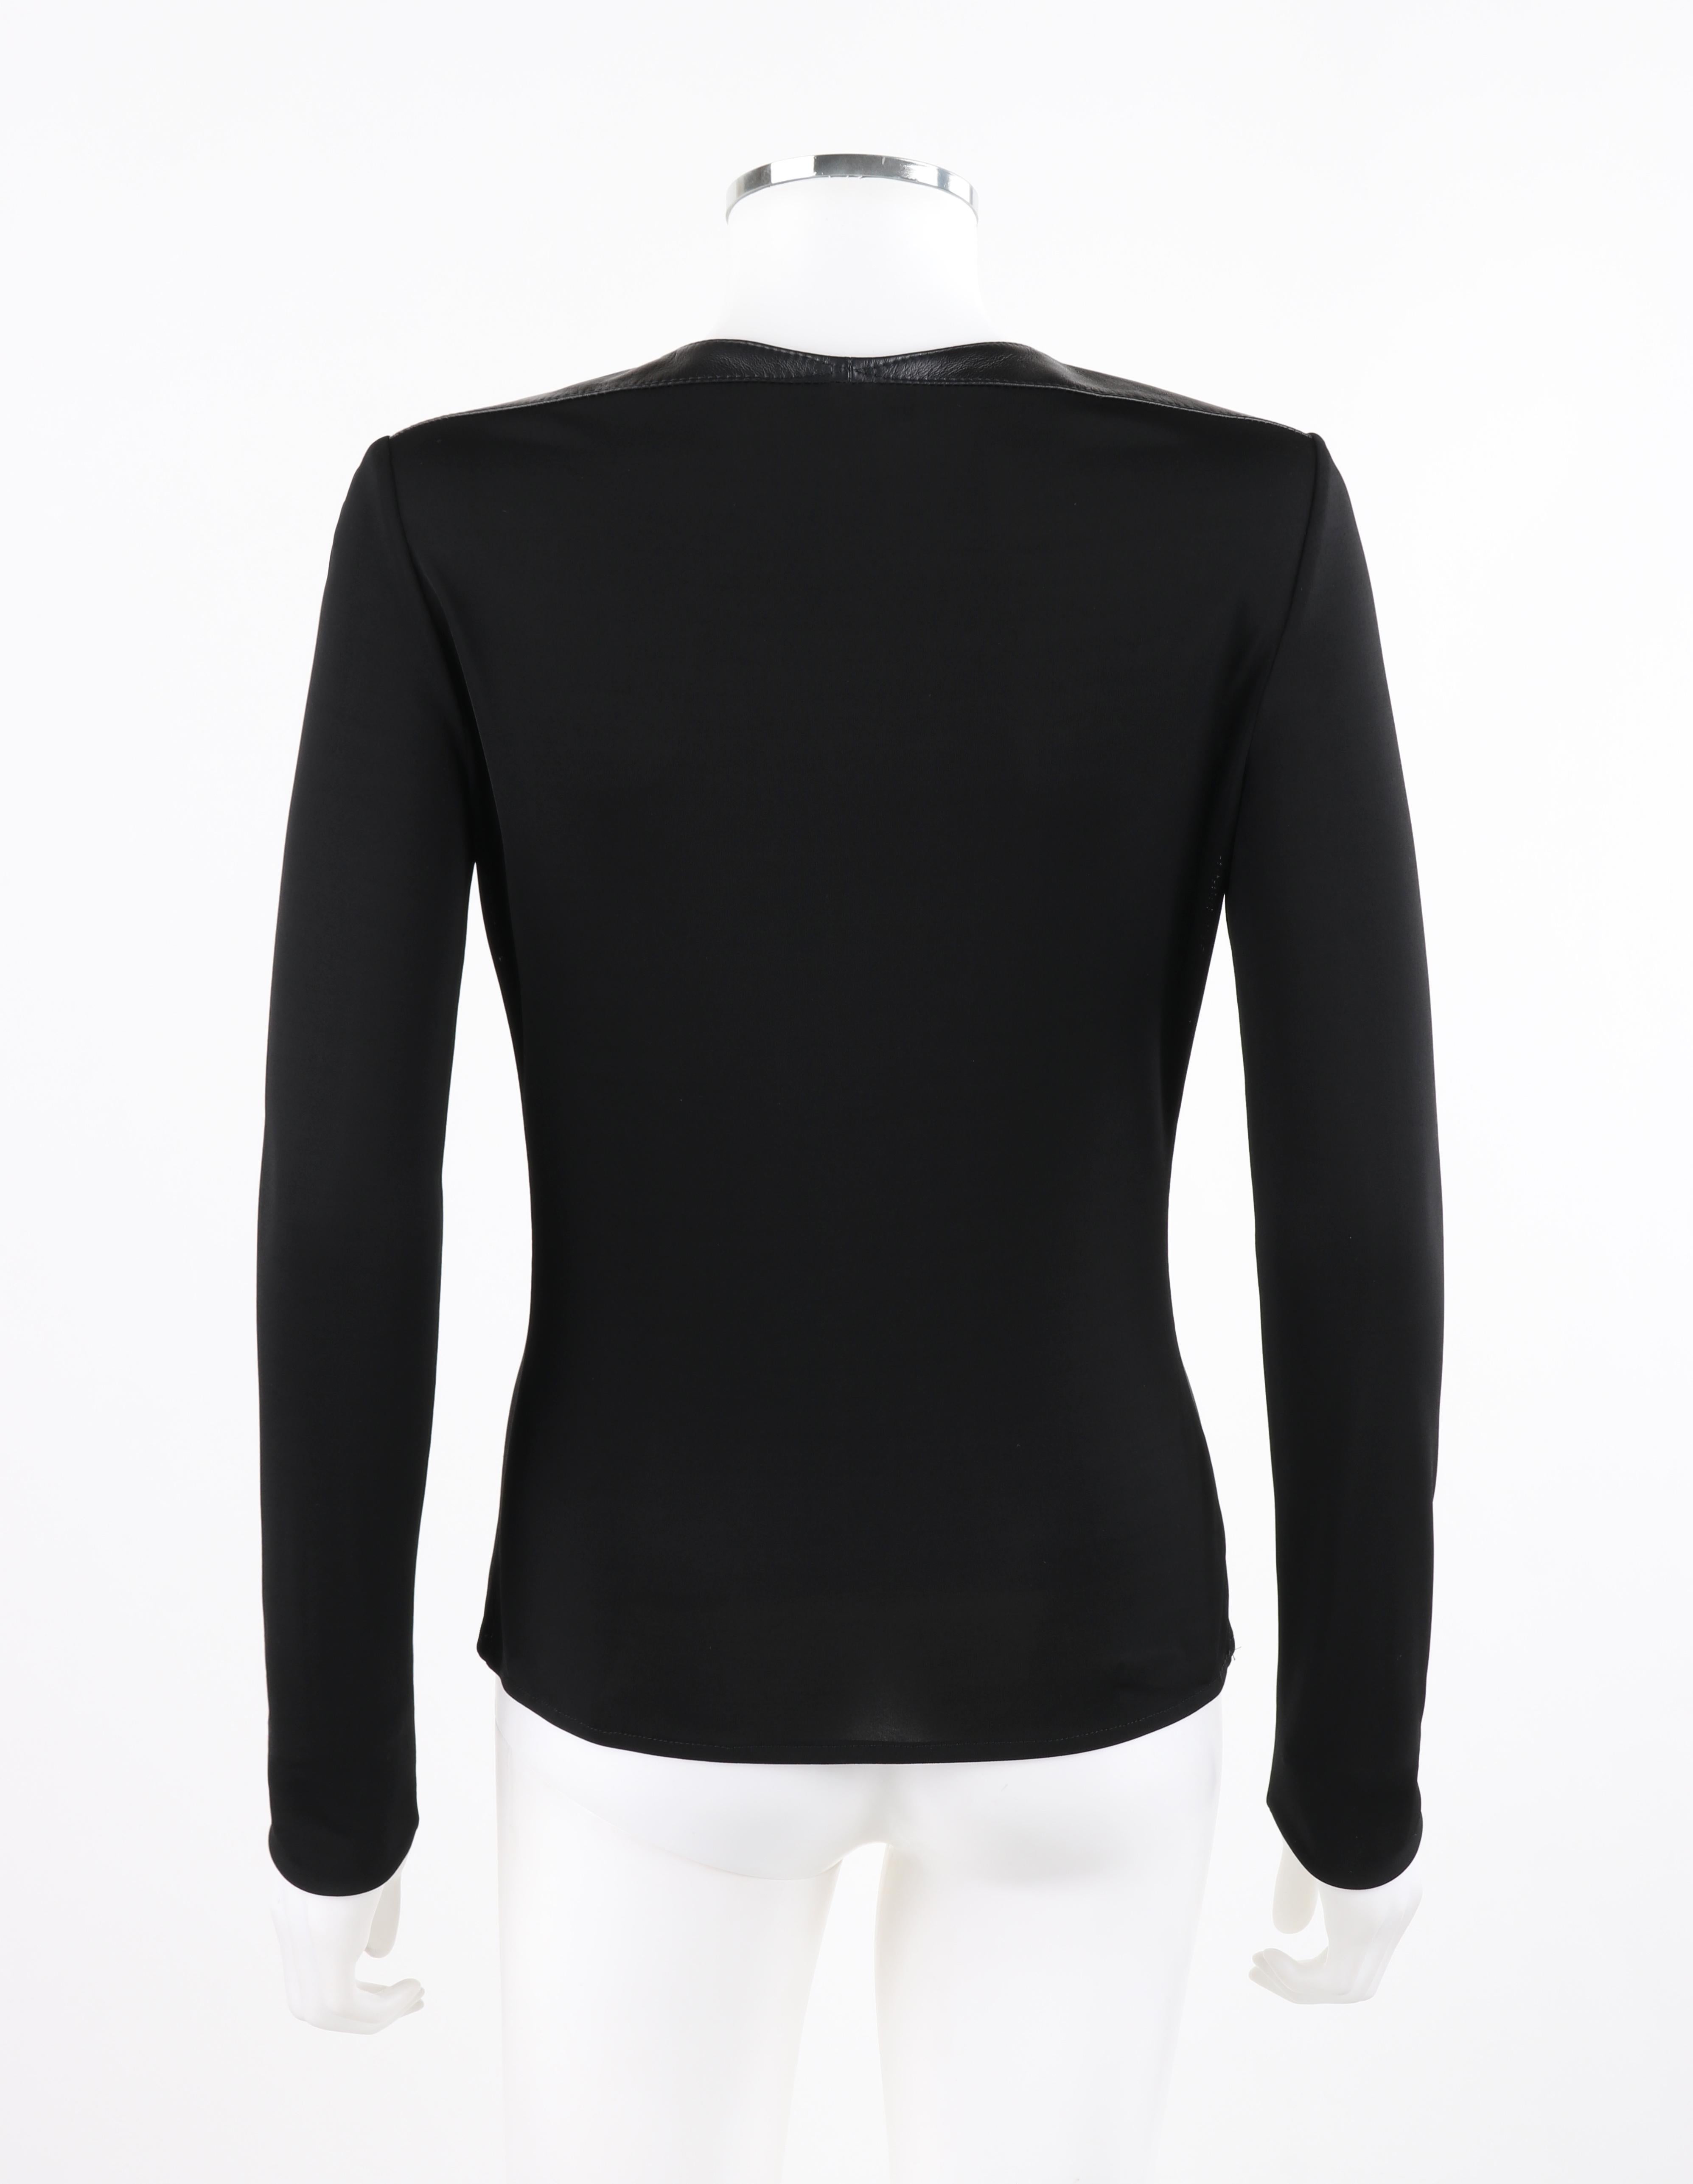 GIANNI VERSACE Couture A/W 1997 Black Cutout Leather Knit Gather Pleated Blouse  For Sale 1